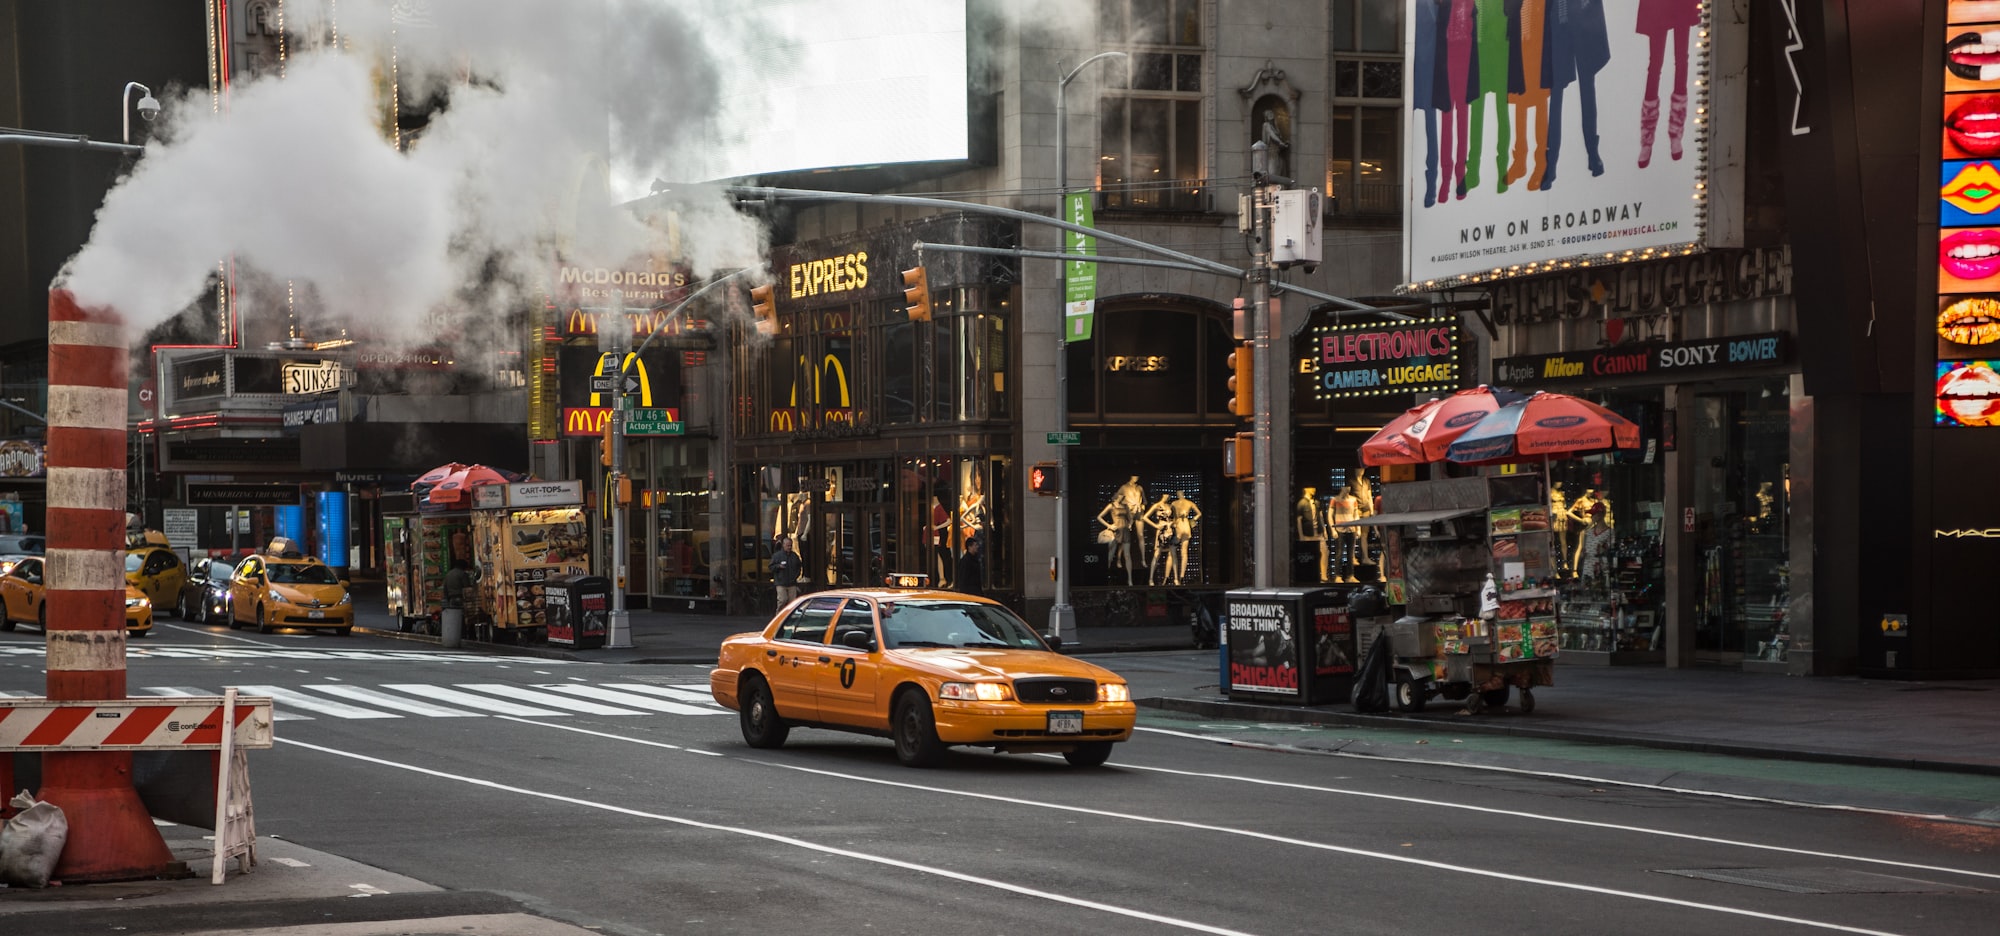 NYC taxi in times square